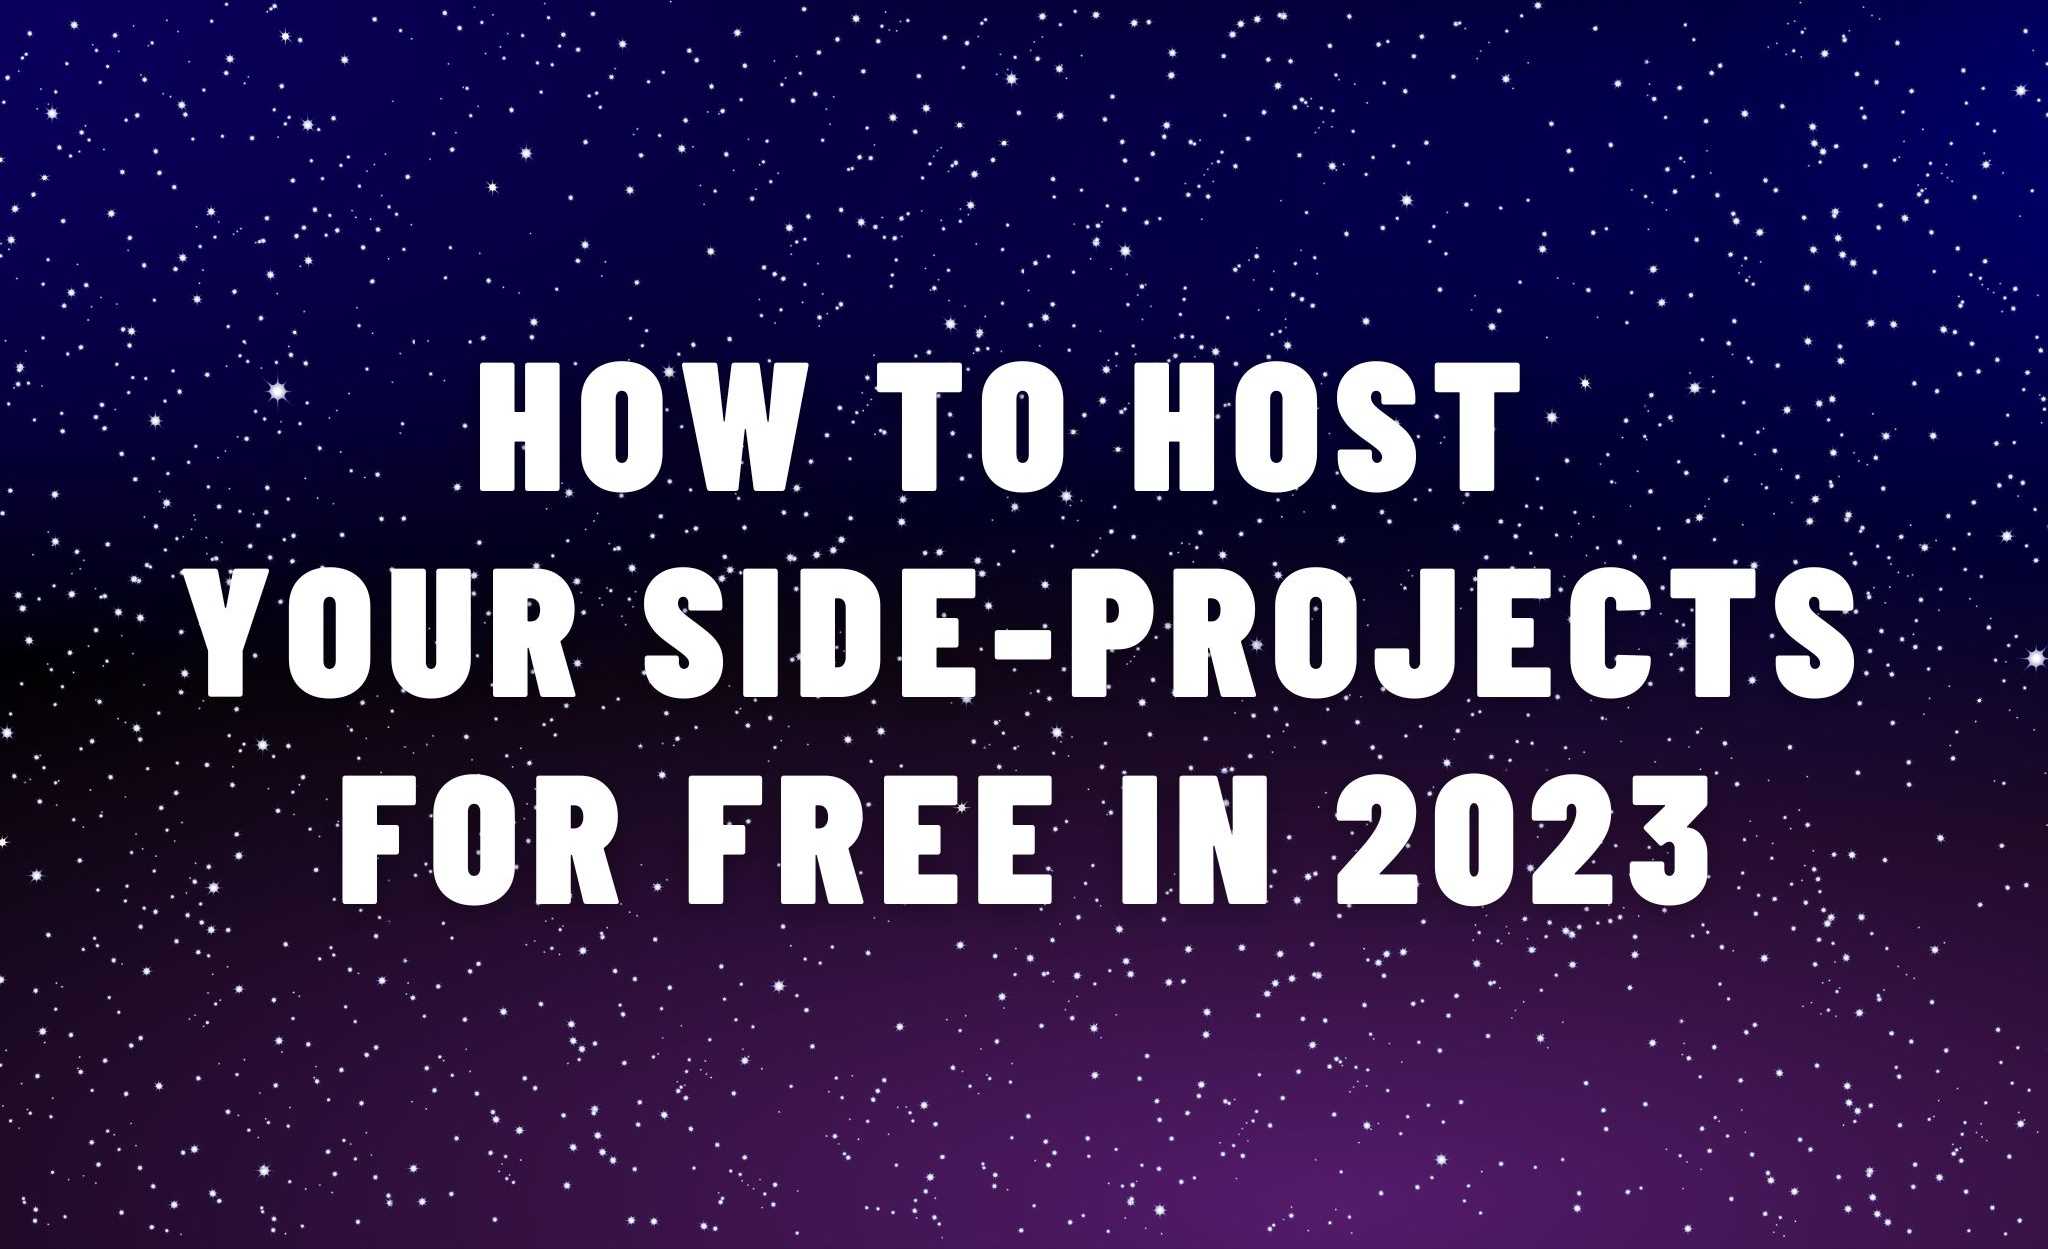 How to host your side-projects for free in 2023: from Auth to Database